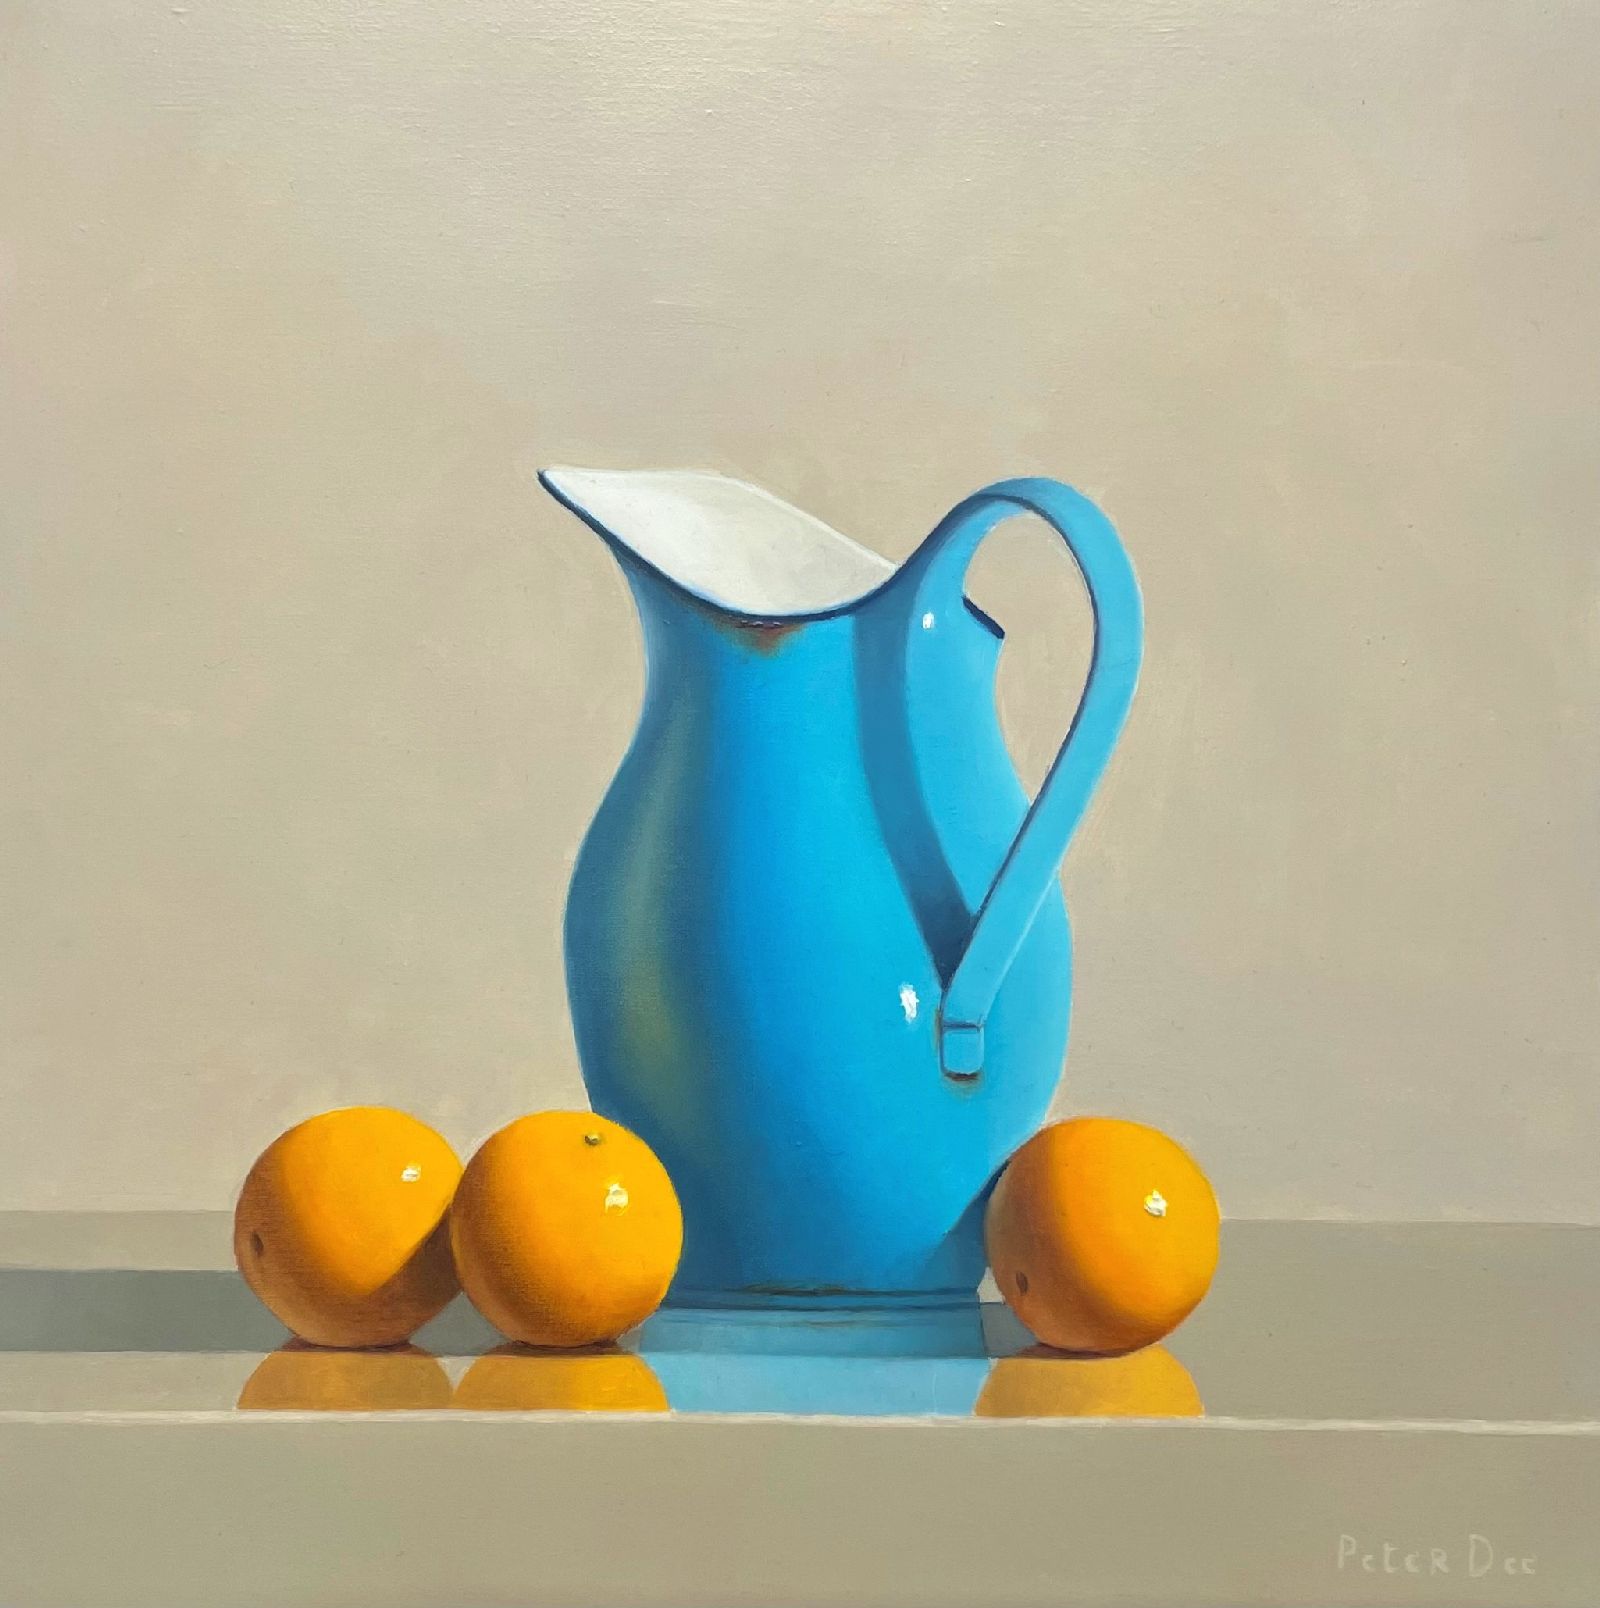 Turquoise Jug with Oranges   by Peter Dee